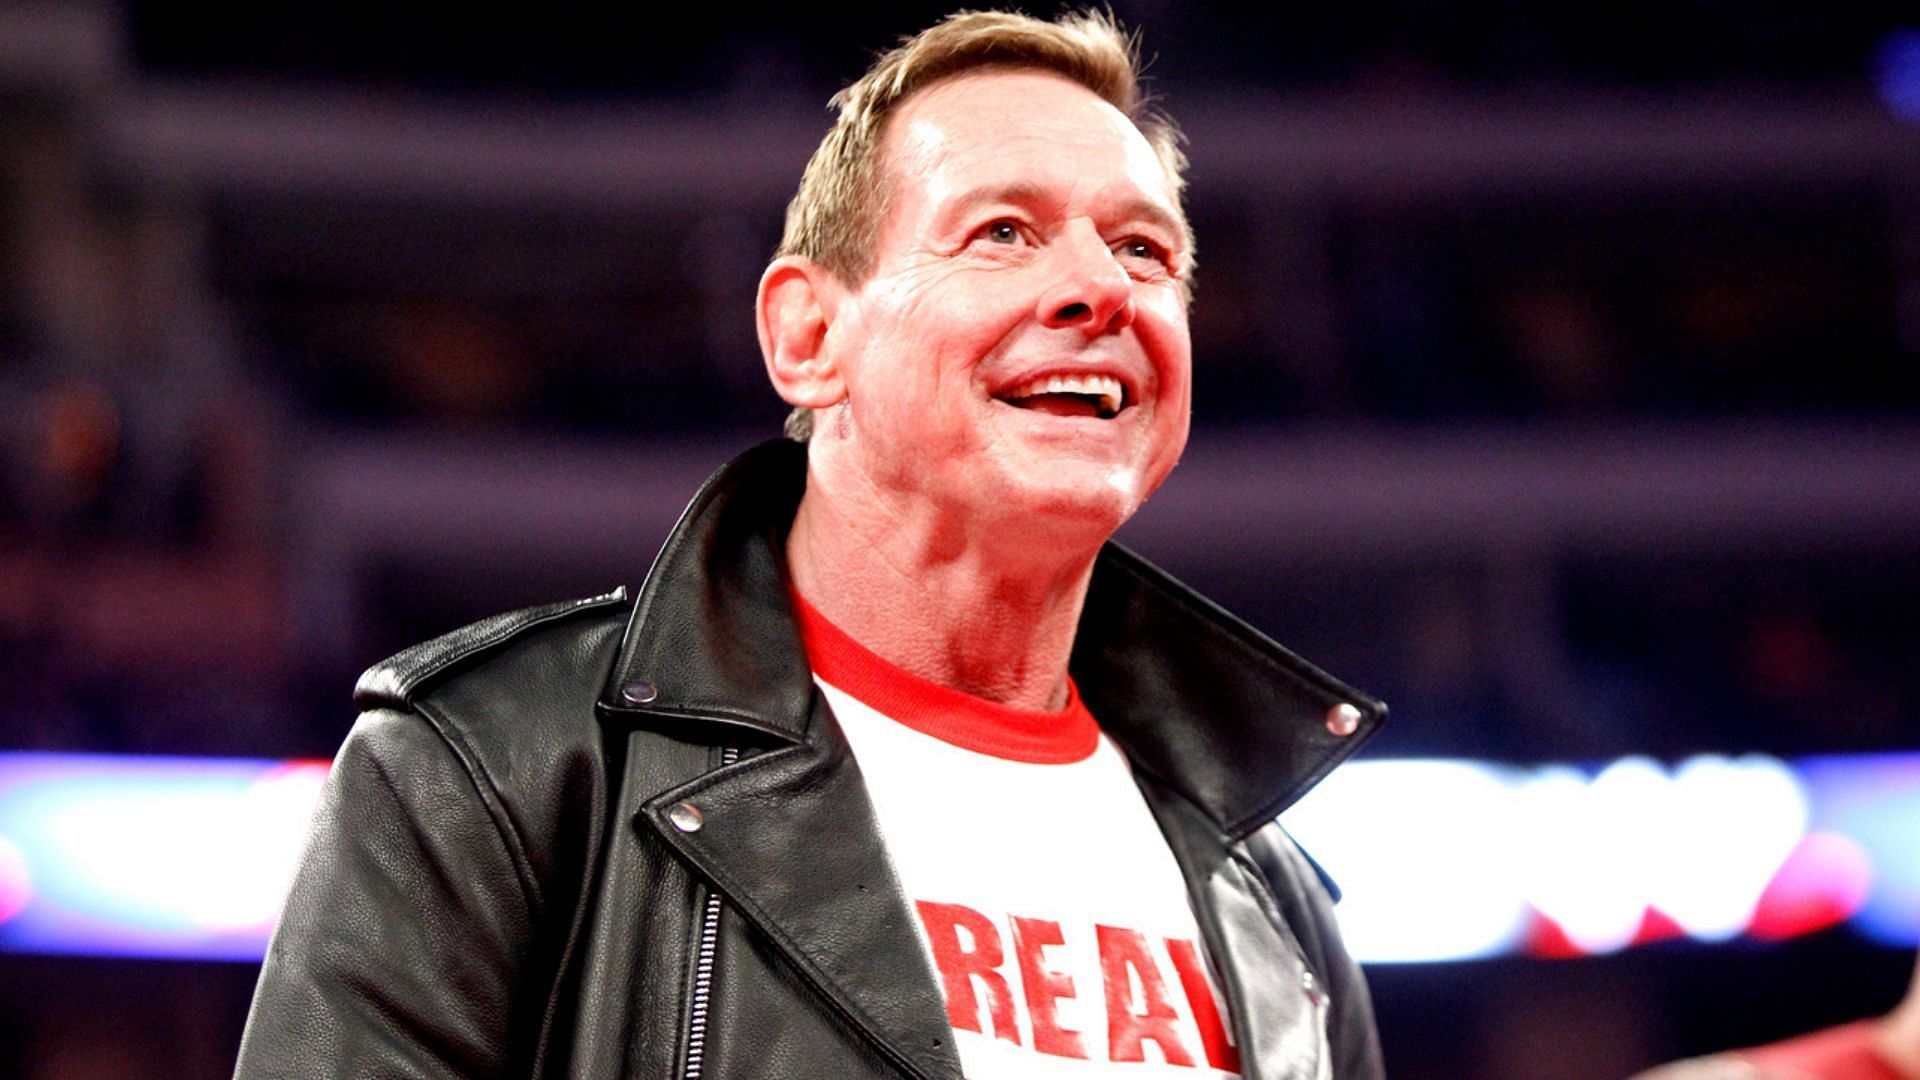 Roddy Piper joined the WWE Hall of Fame in 2005